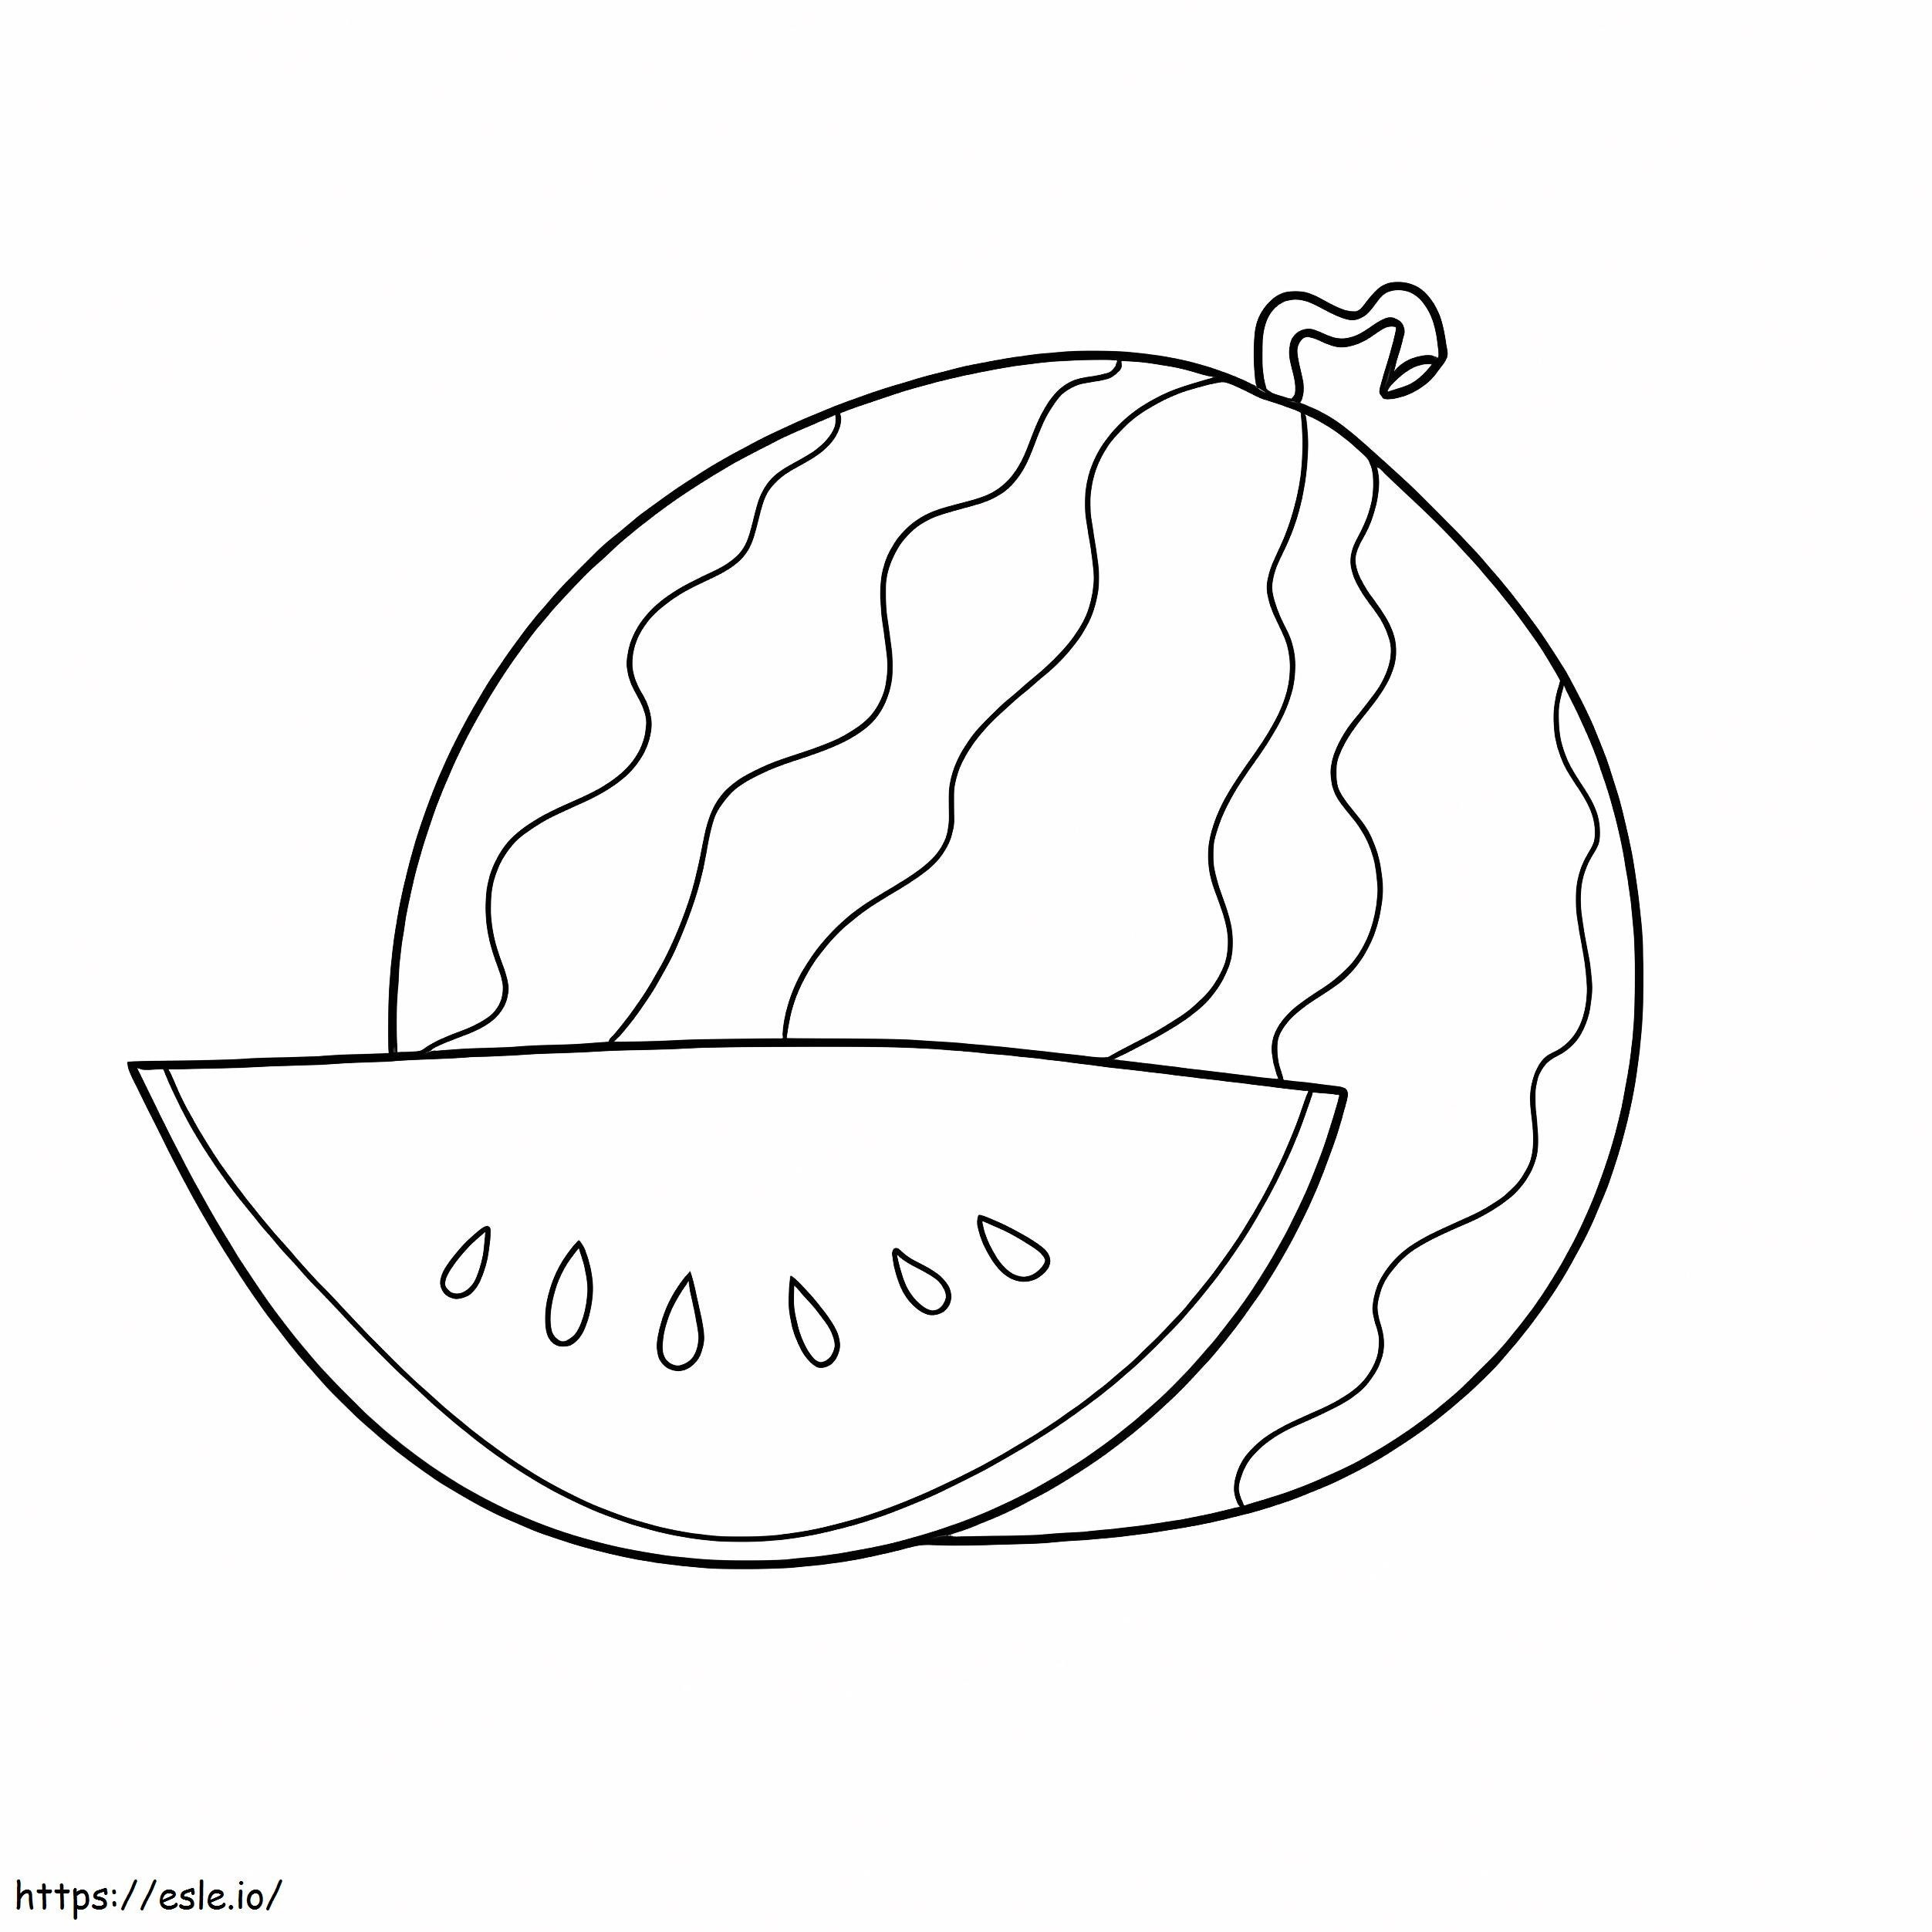 Watermelon Slice And Regular Watermelon coloring page